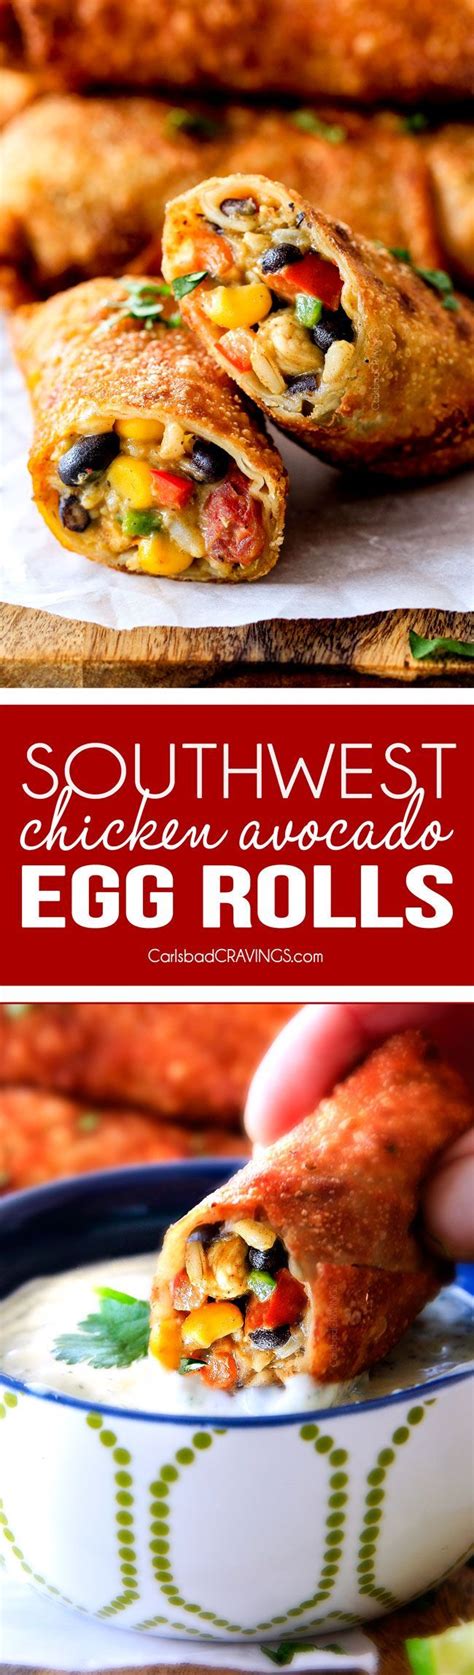 Crispy Southwest Egg Rolls Loaded With Mexican Spiced Chicken Beans